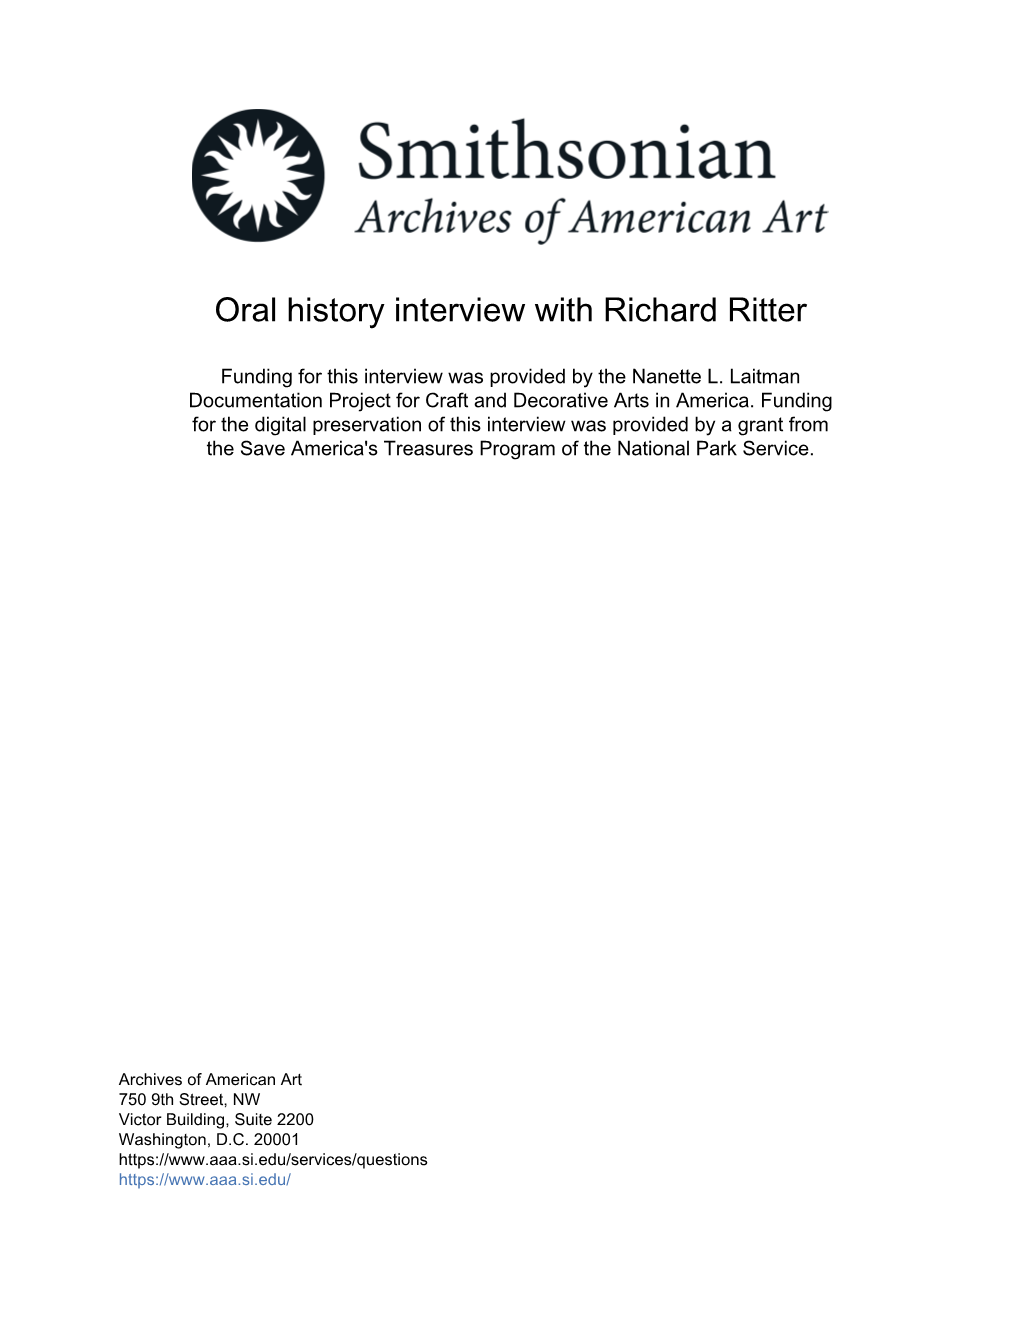 Oral History Interview with Richard Ritter